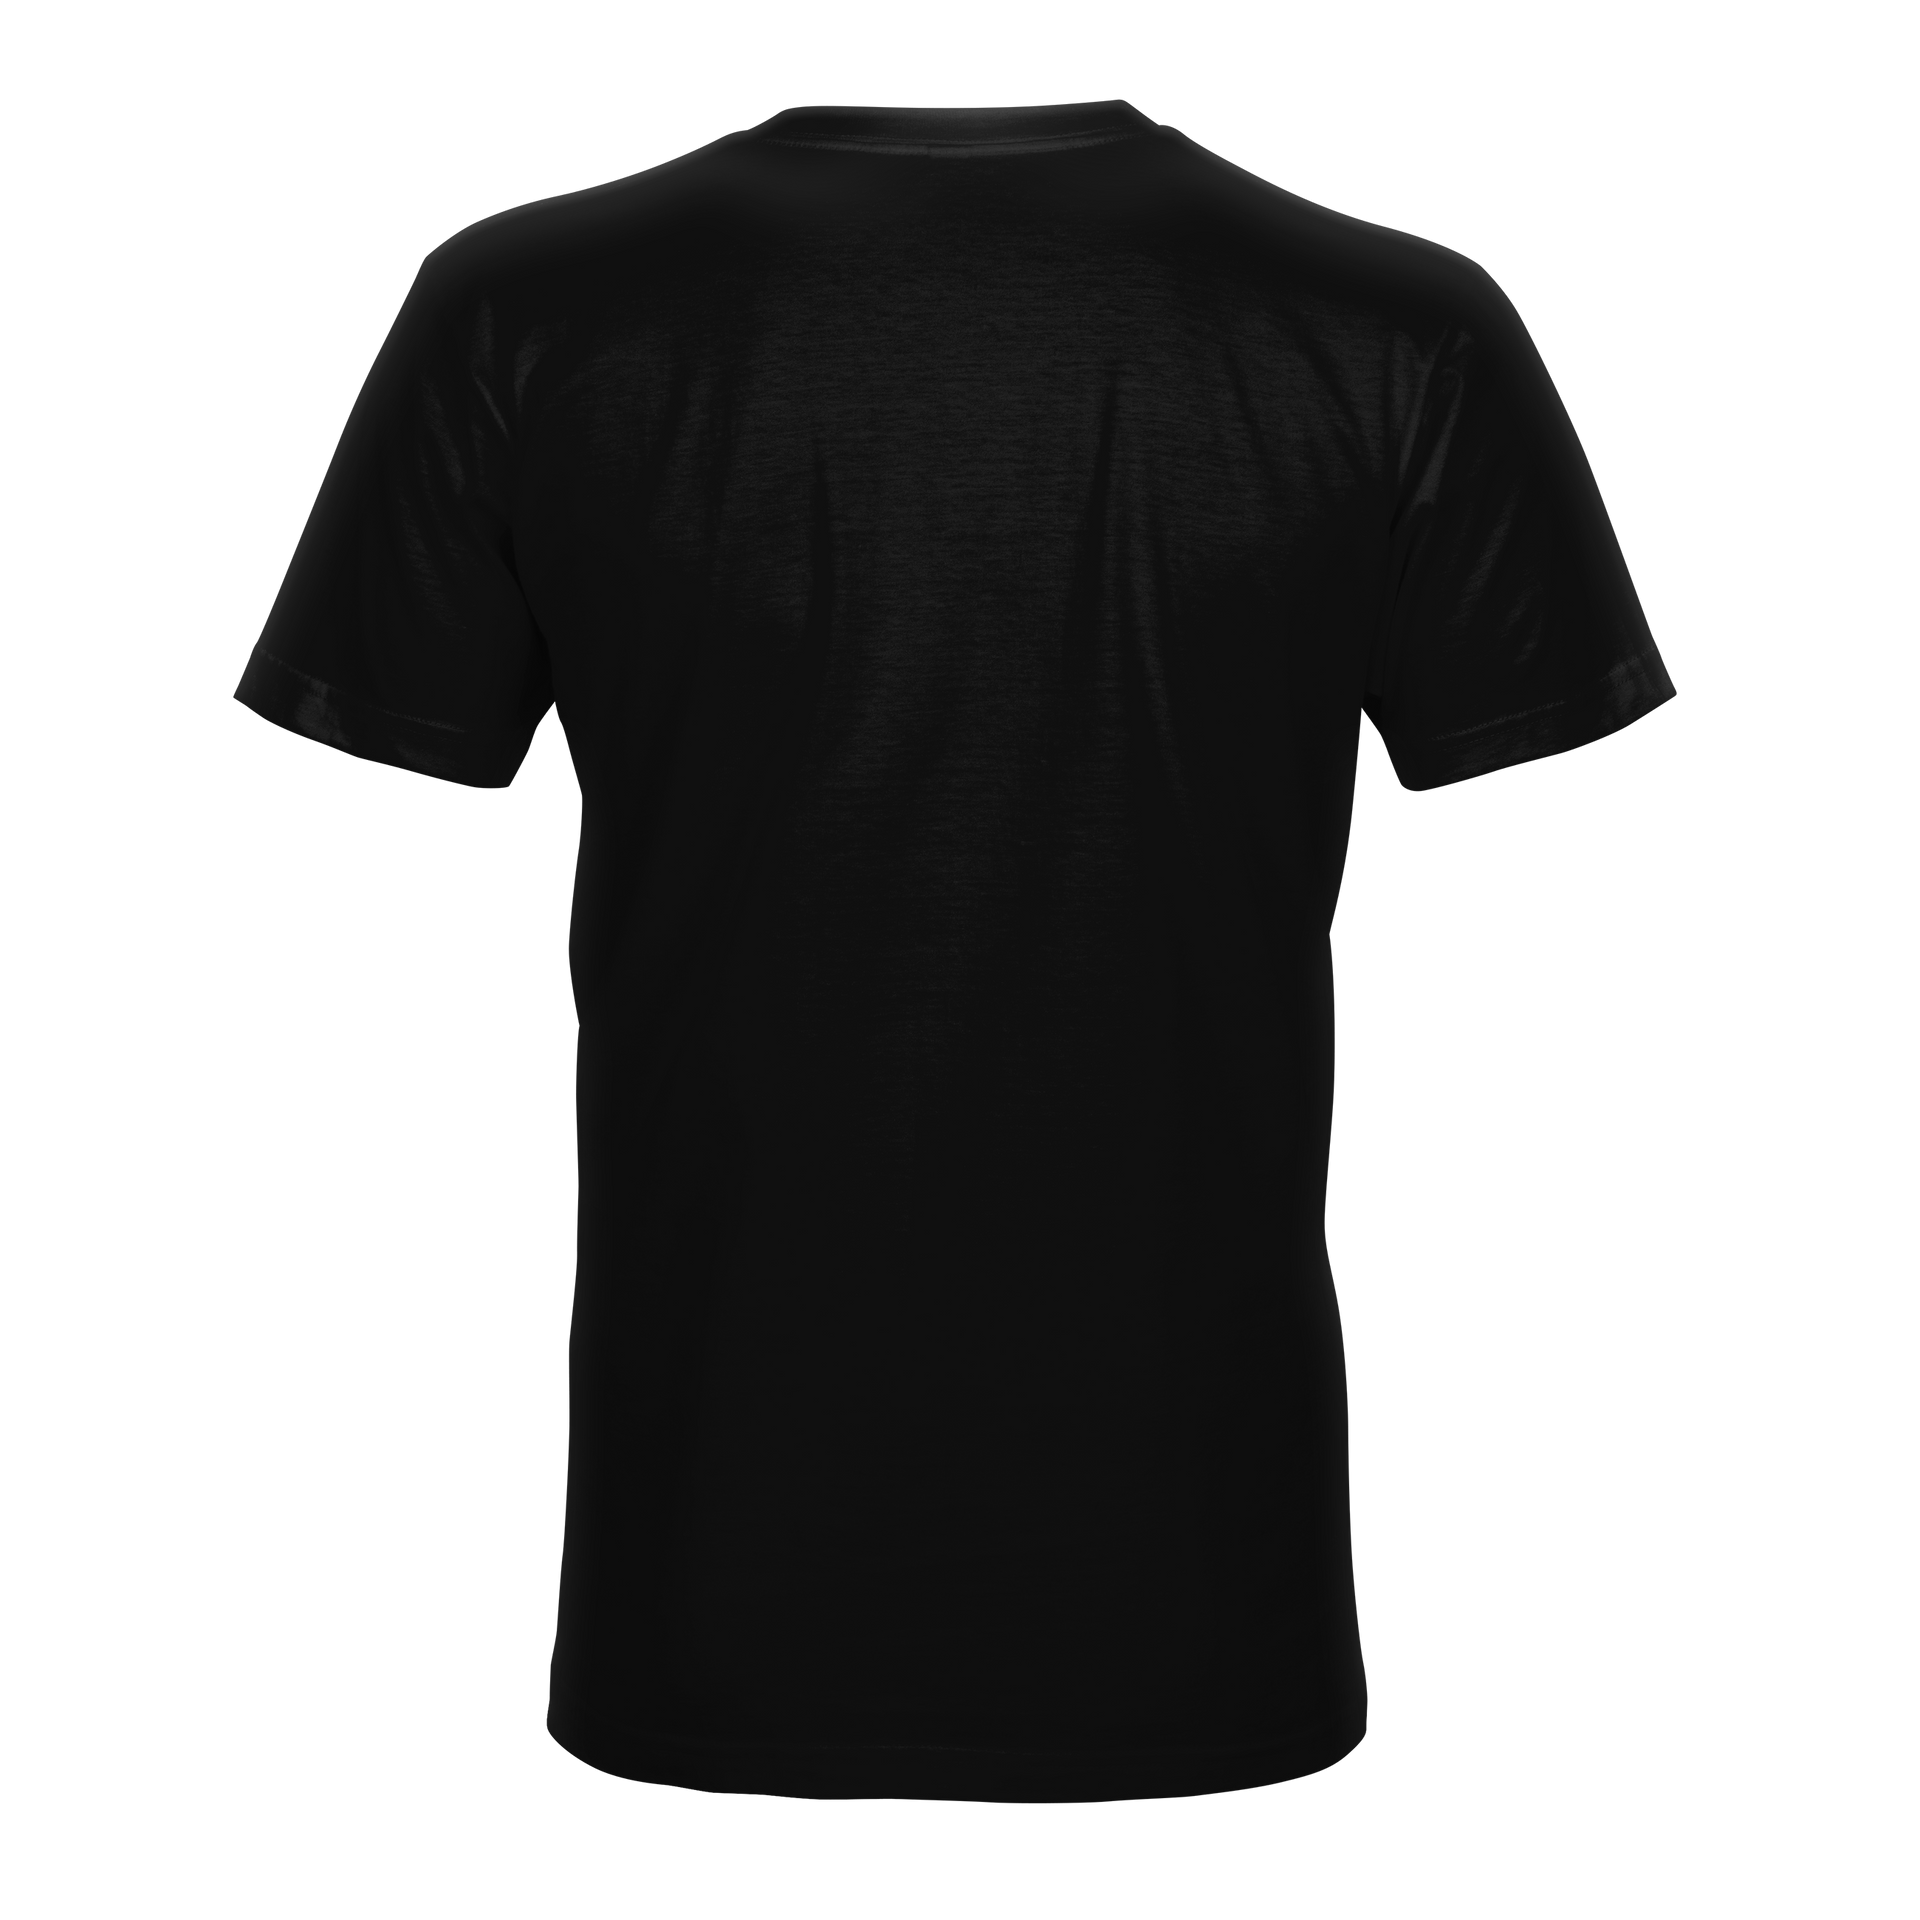 STLHD Men’s Harvest Moon Black Tee - H&H Outfitters